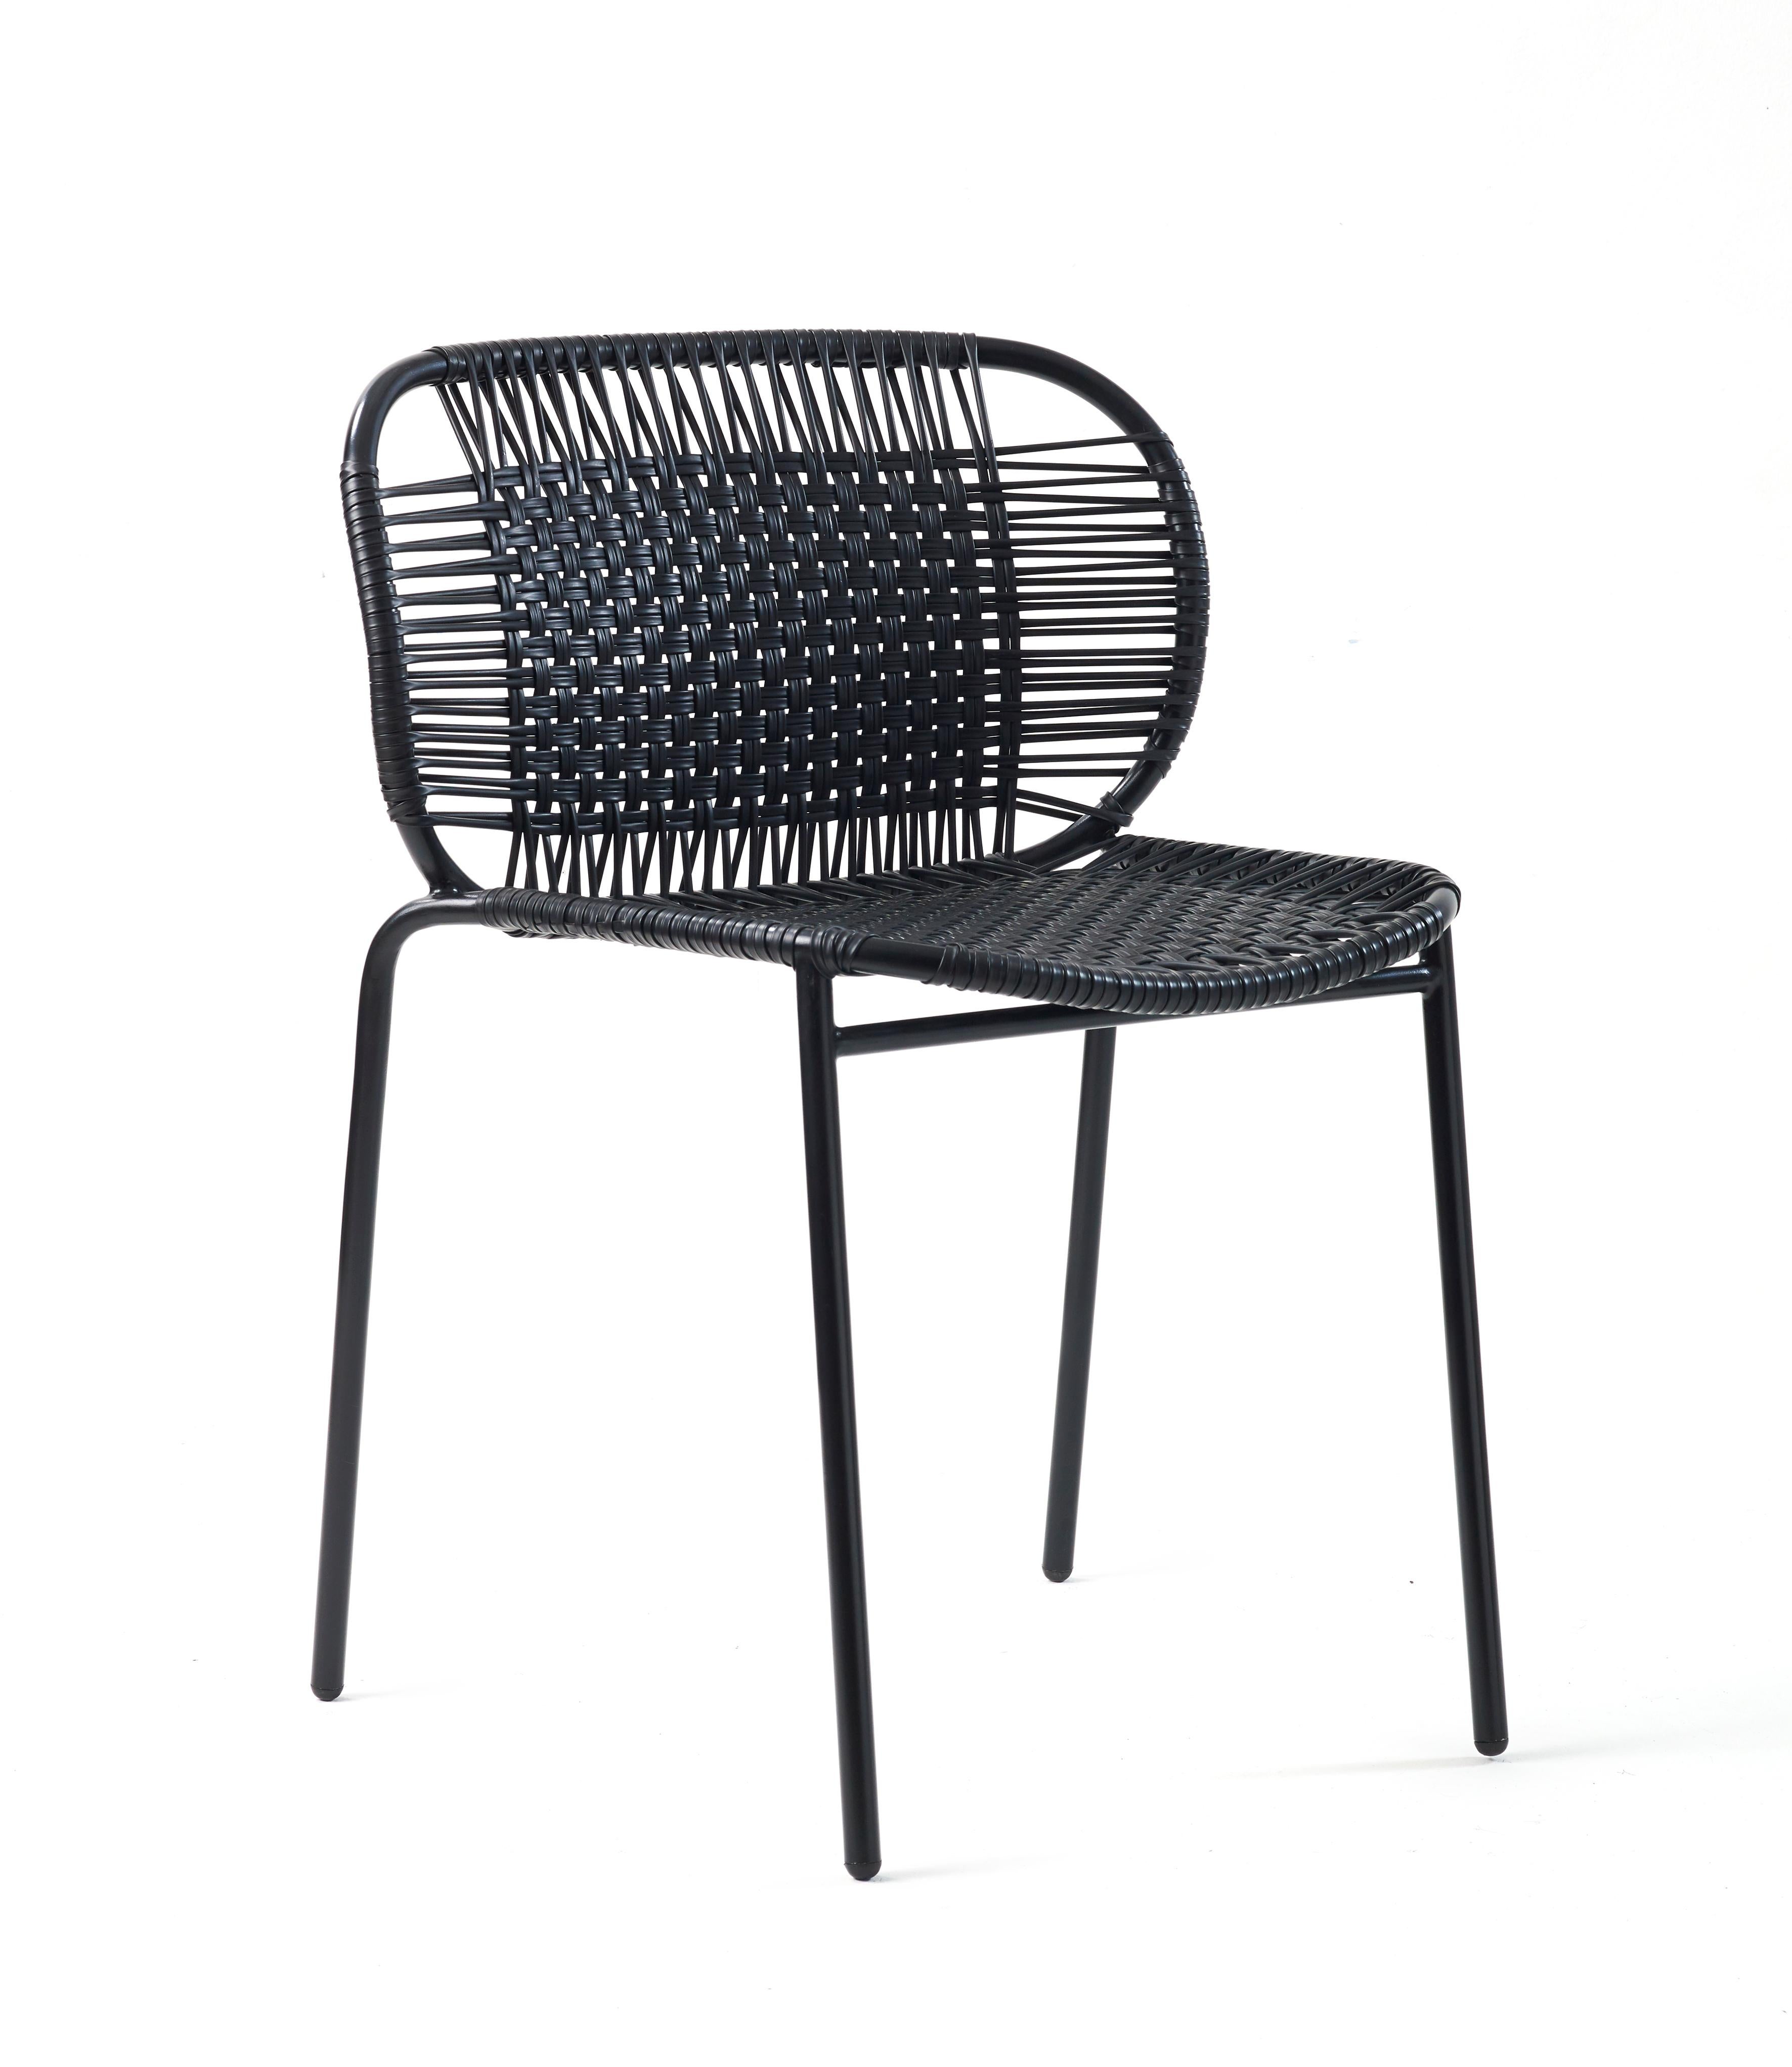 Set of 2 black Cielo stacking chair by Sebastian Herkner
Materials: PVC strings, powder-coated steel frame. 
Technique: Made from recycled plastic and weaved by local craftspeople in Cartagena, Colombia. 
Dimensions: W 56 x D 51.4 x H 78 cm